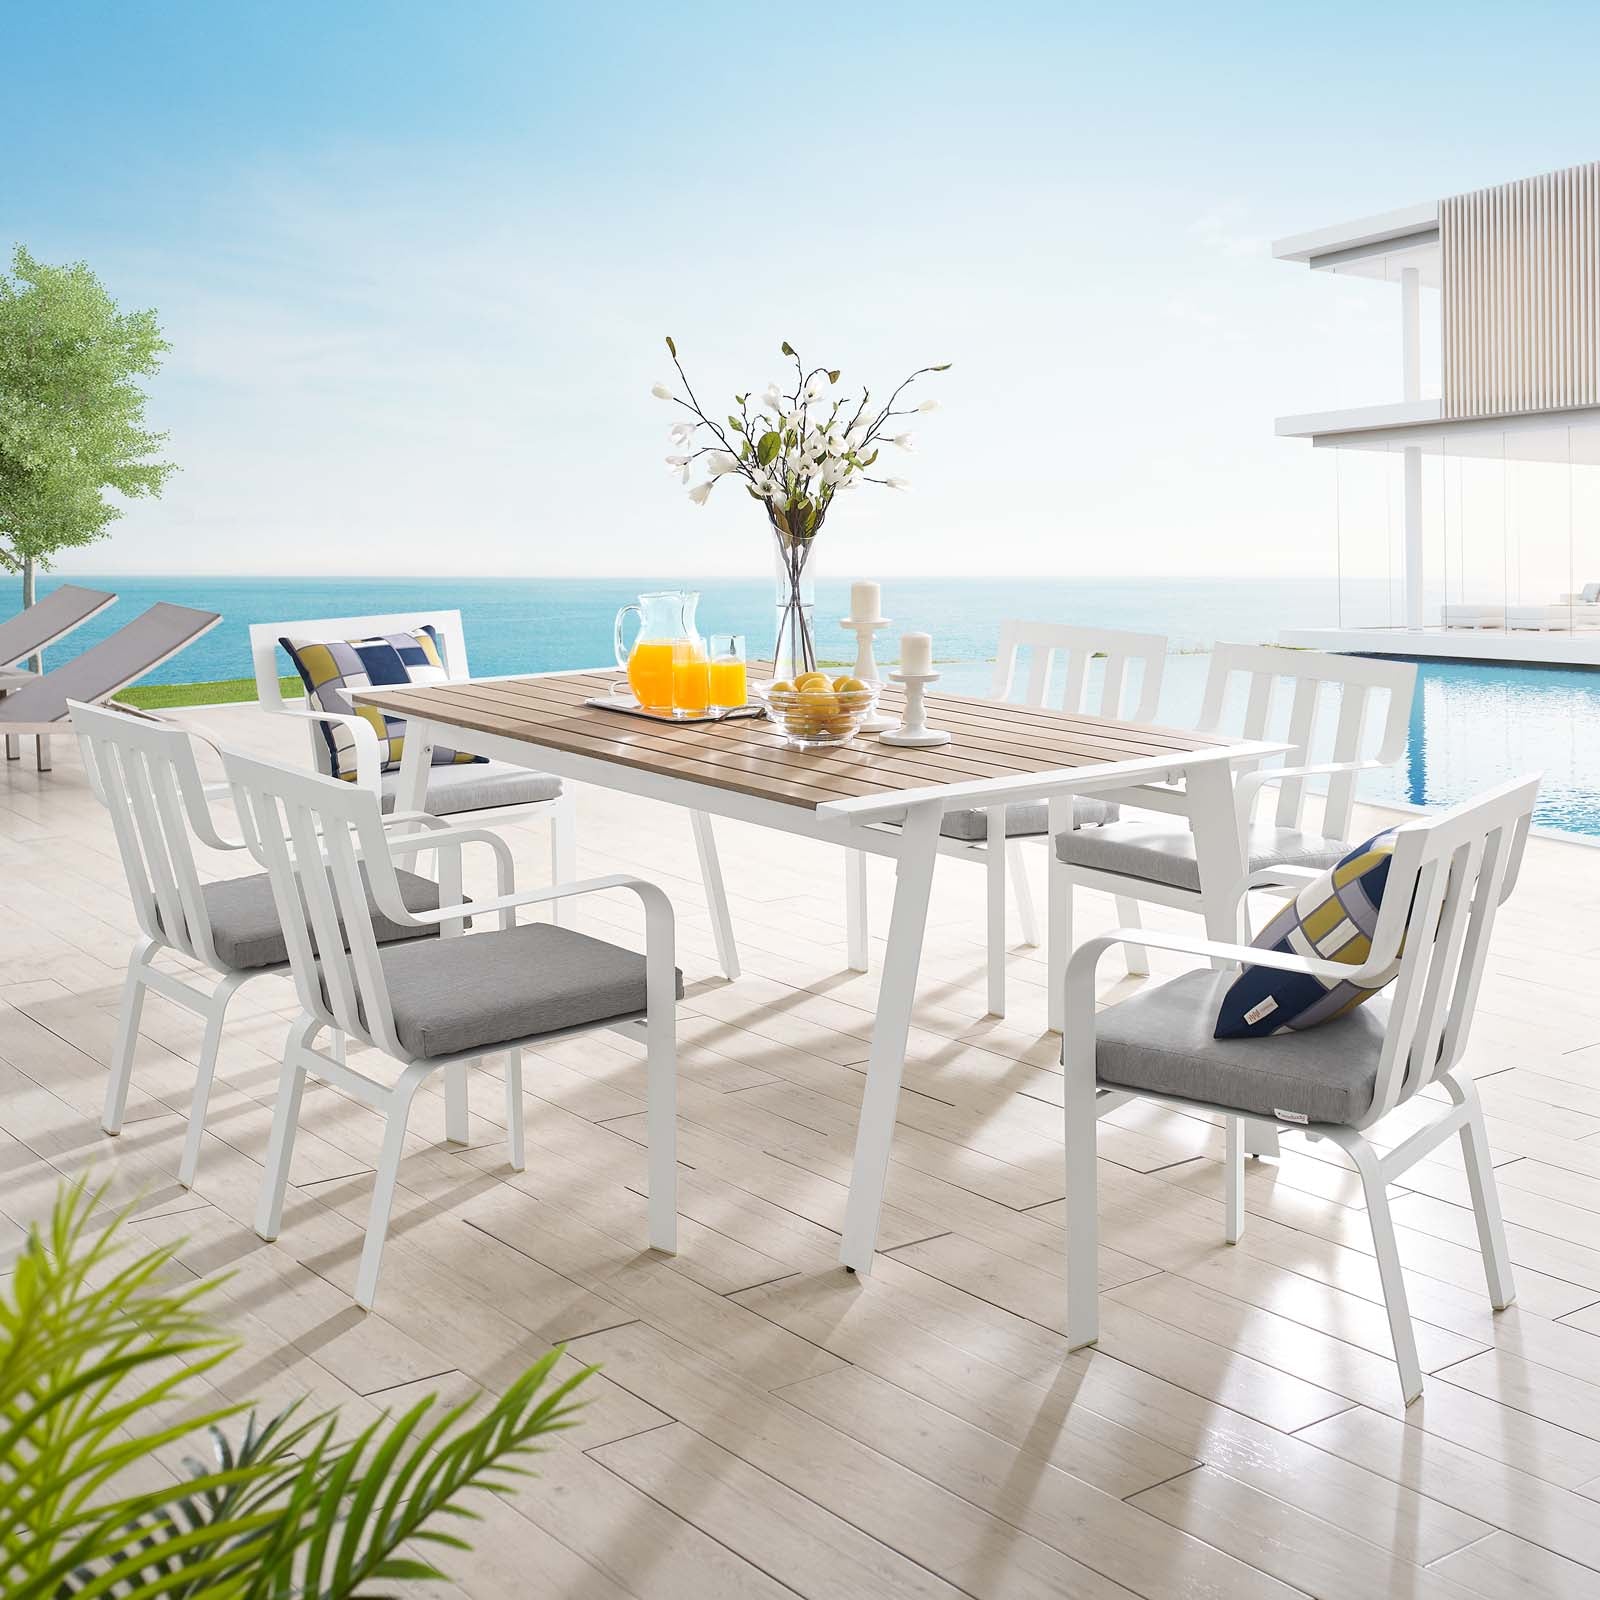 Baxley 7 Piece Outdoor Patio Aluminum Dining Set - East Shore Modern Home Furnishings